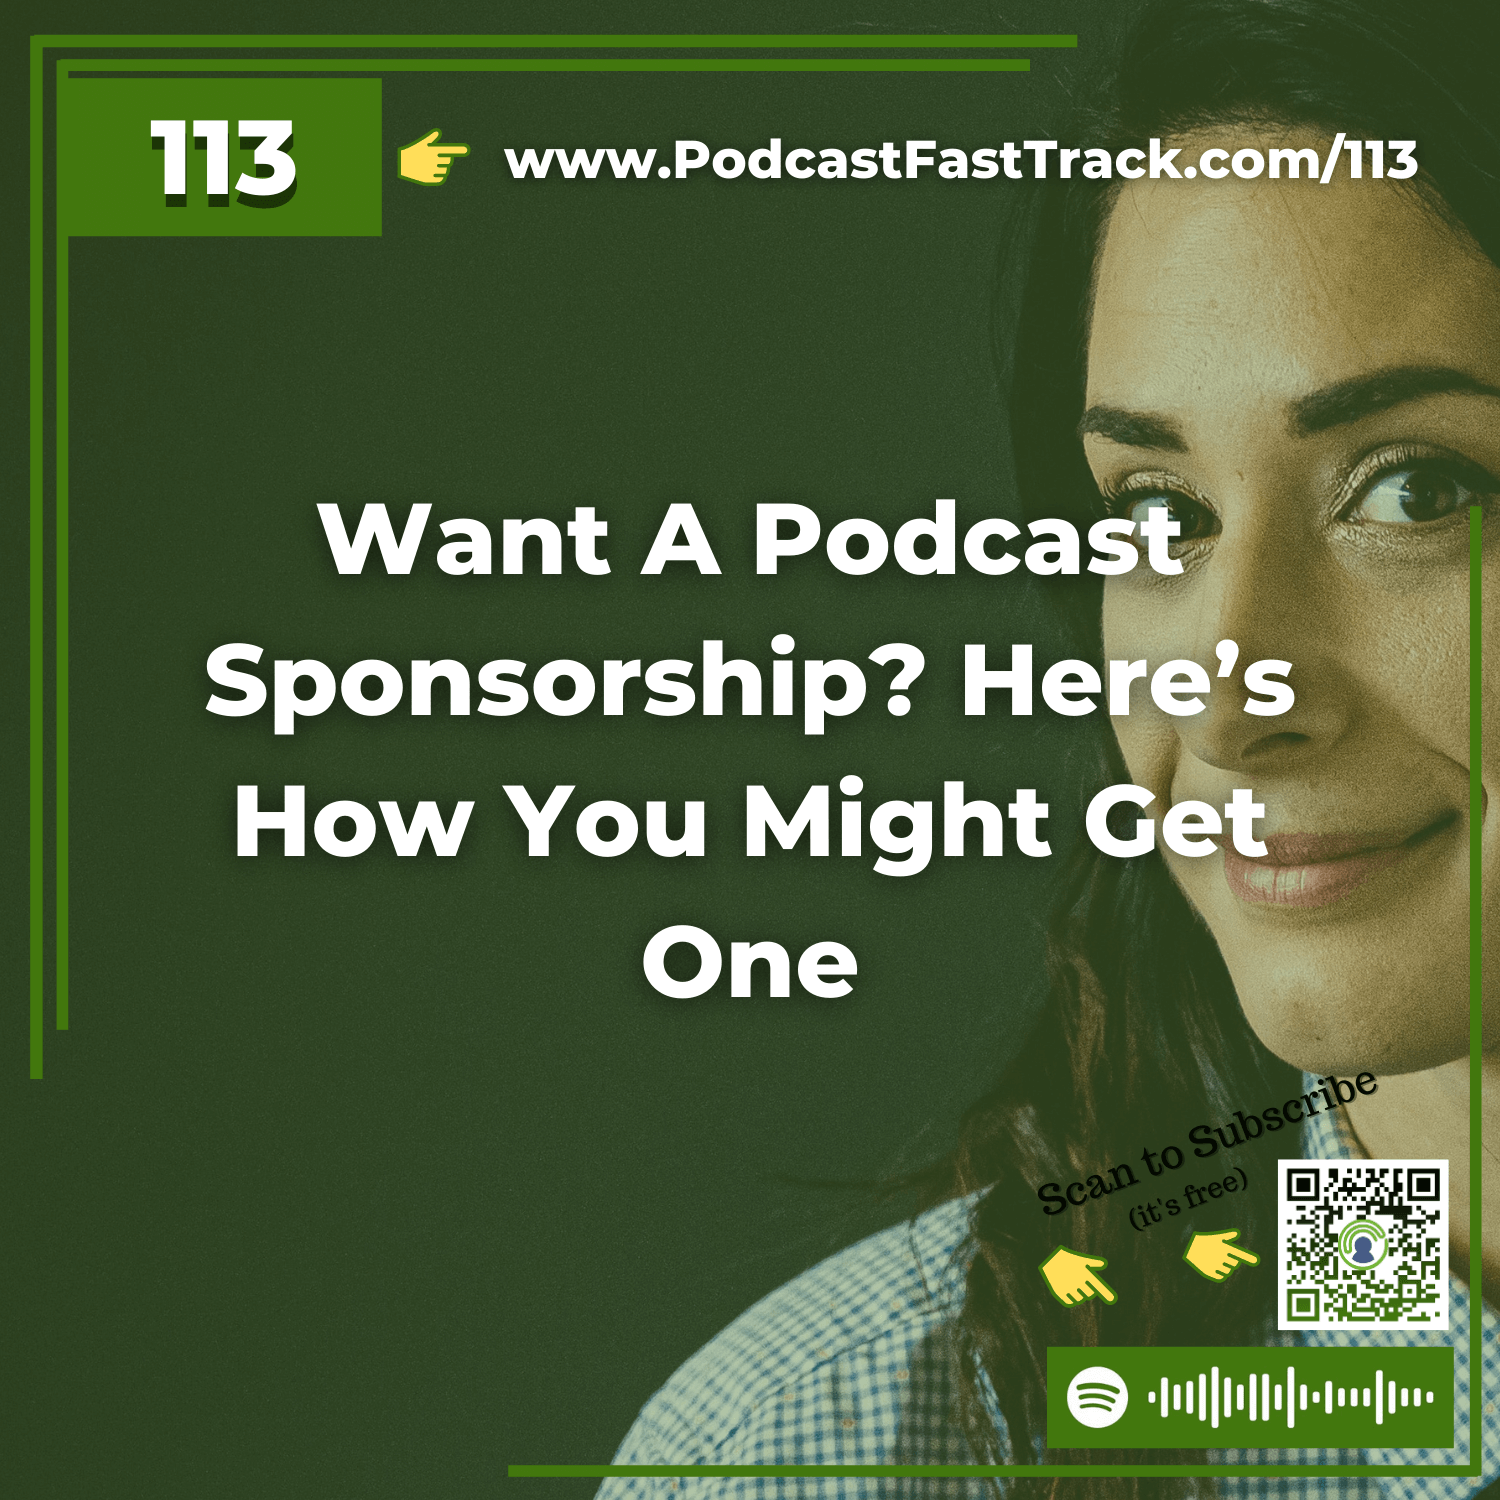 113: Want A Podcast Sponsorship? Here’s How You Might Get One